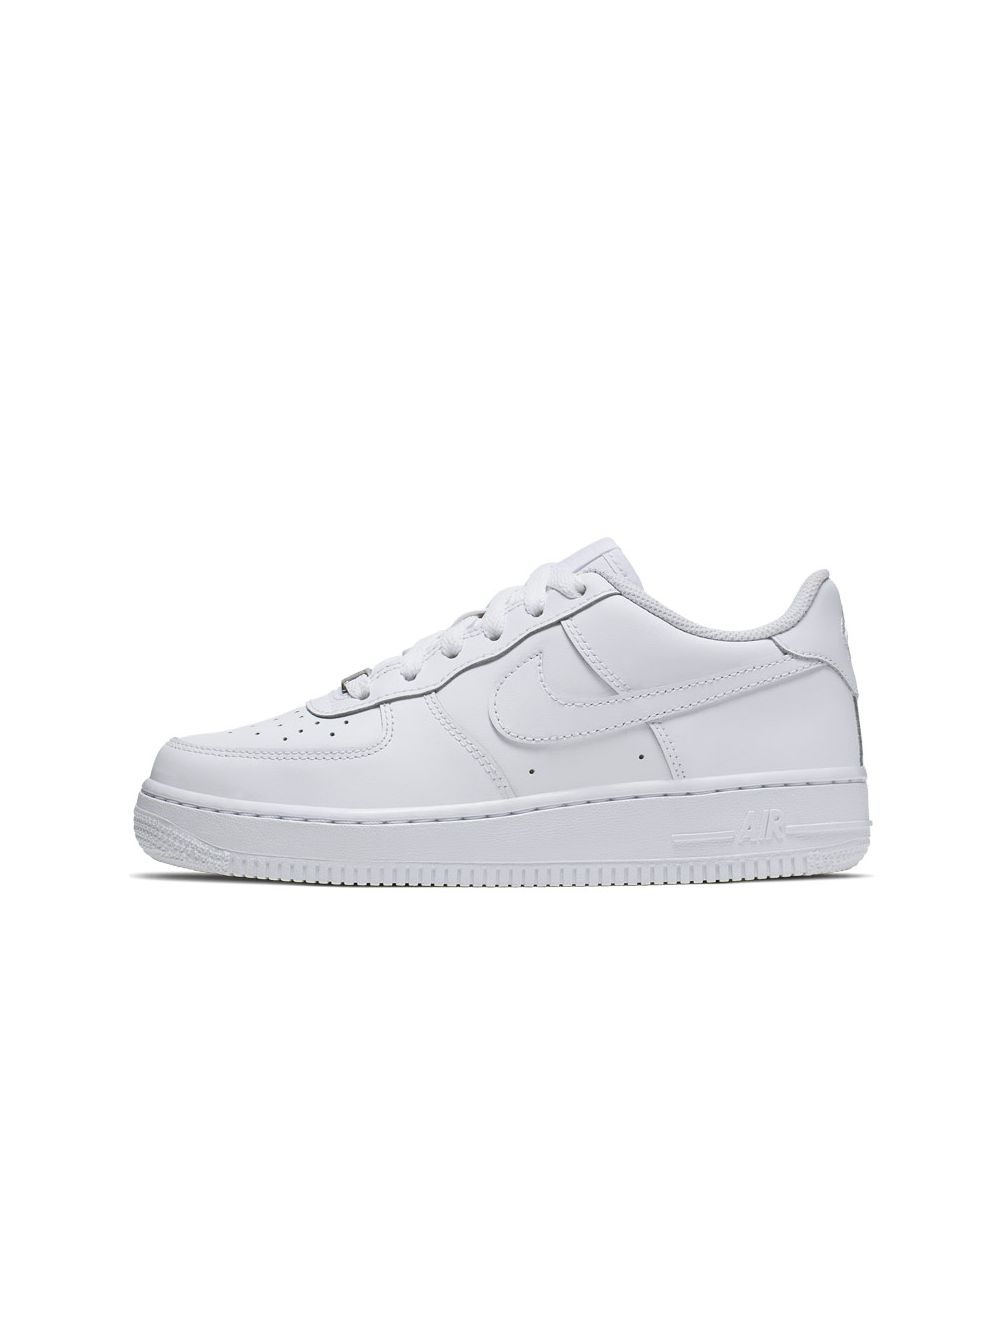 nike air force 1 white youth